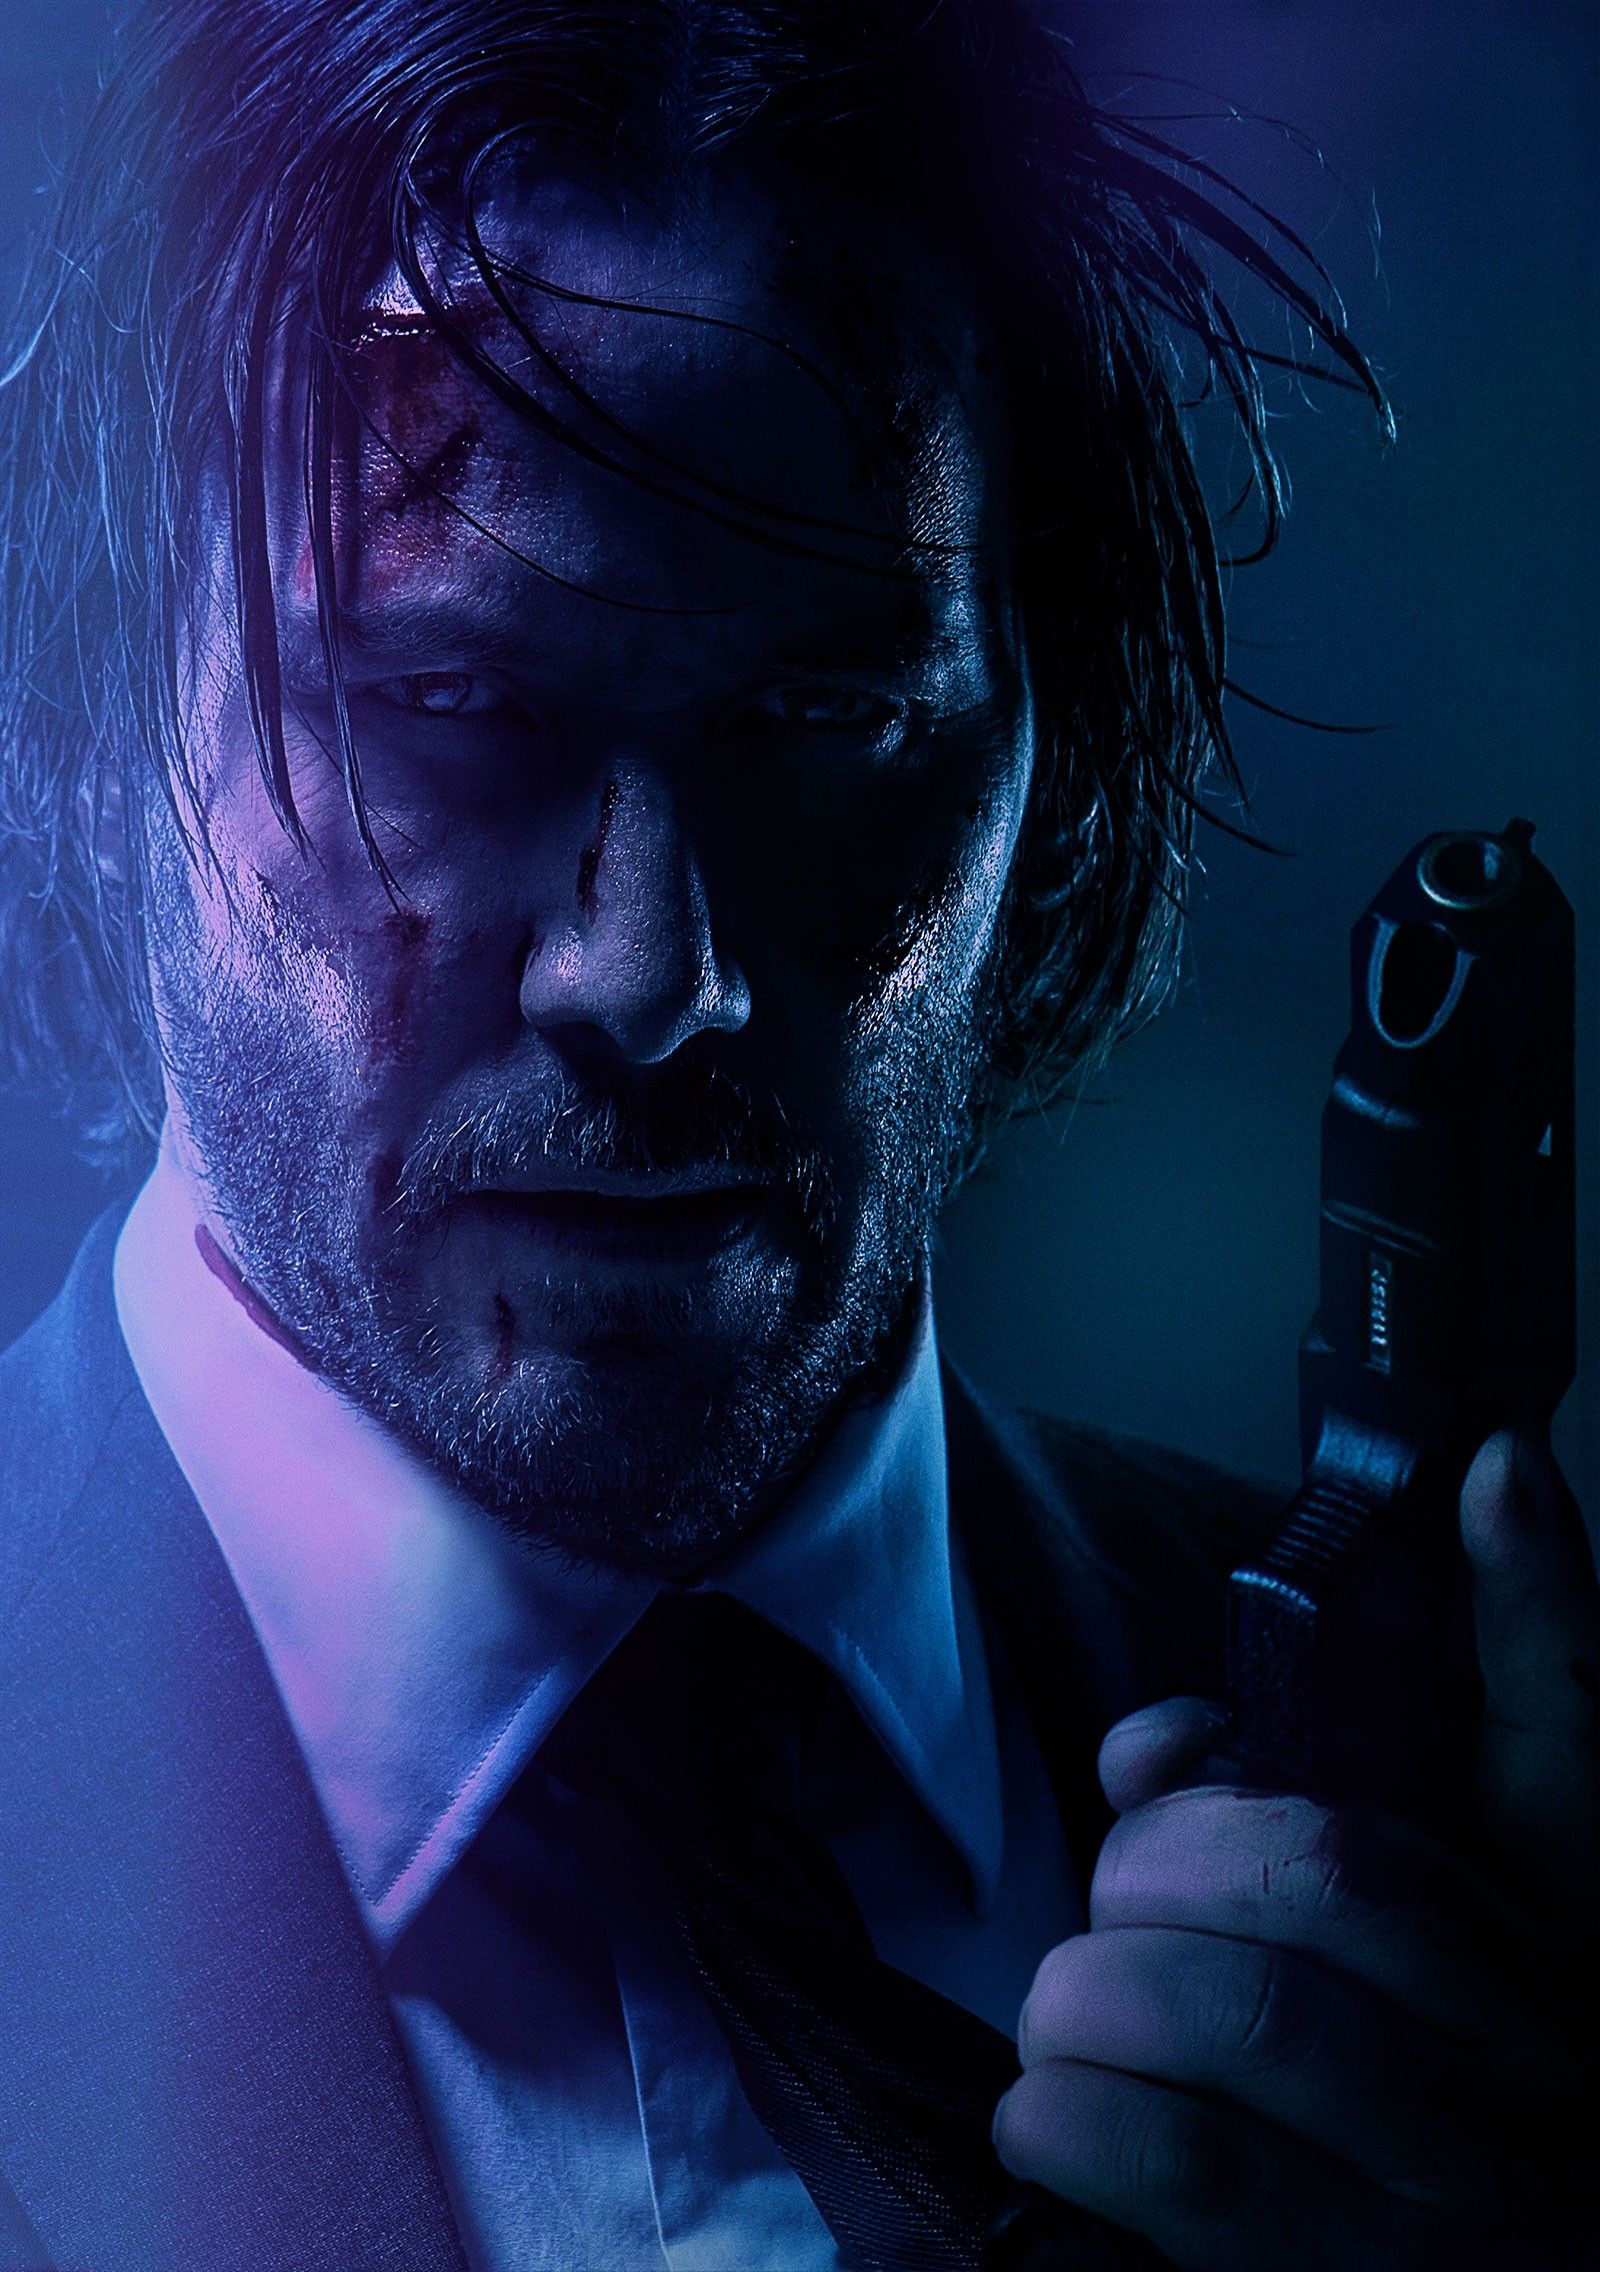 John Wick Keanu Reeves phone HD Wallpaper, Image, Background, Photo and Picture